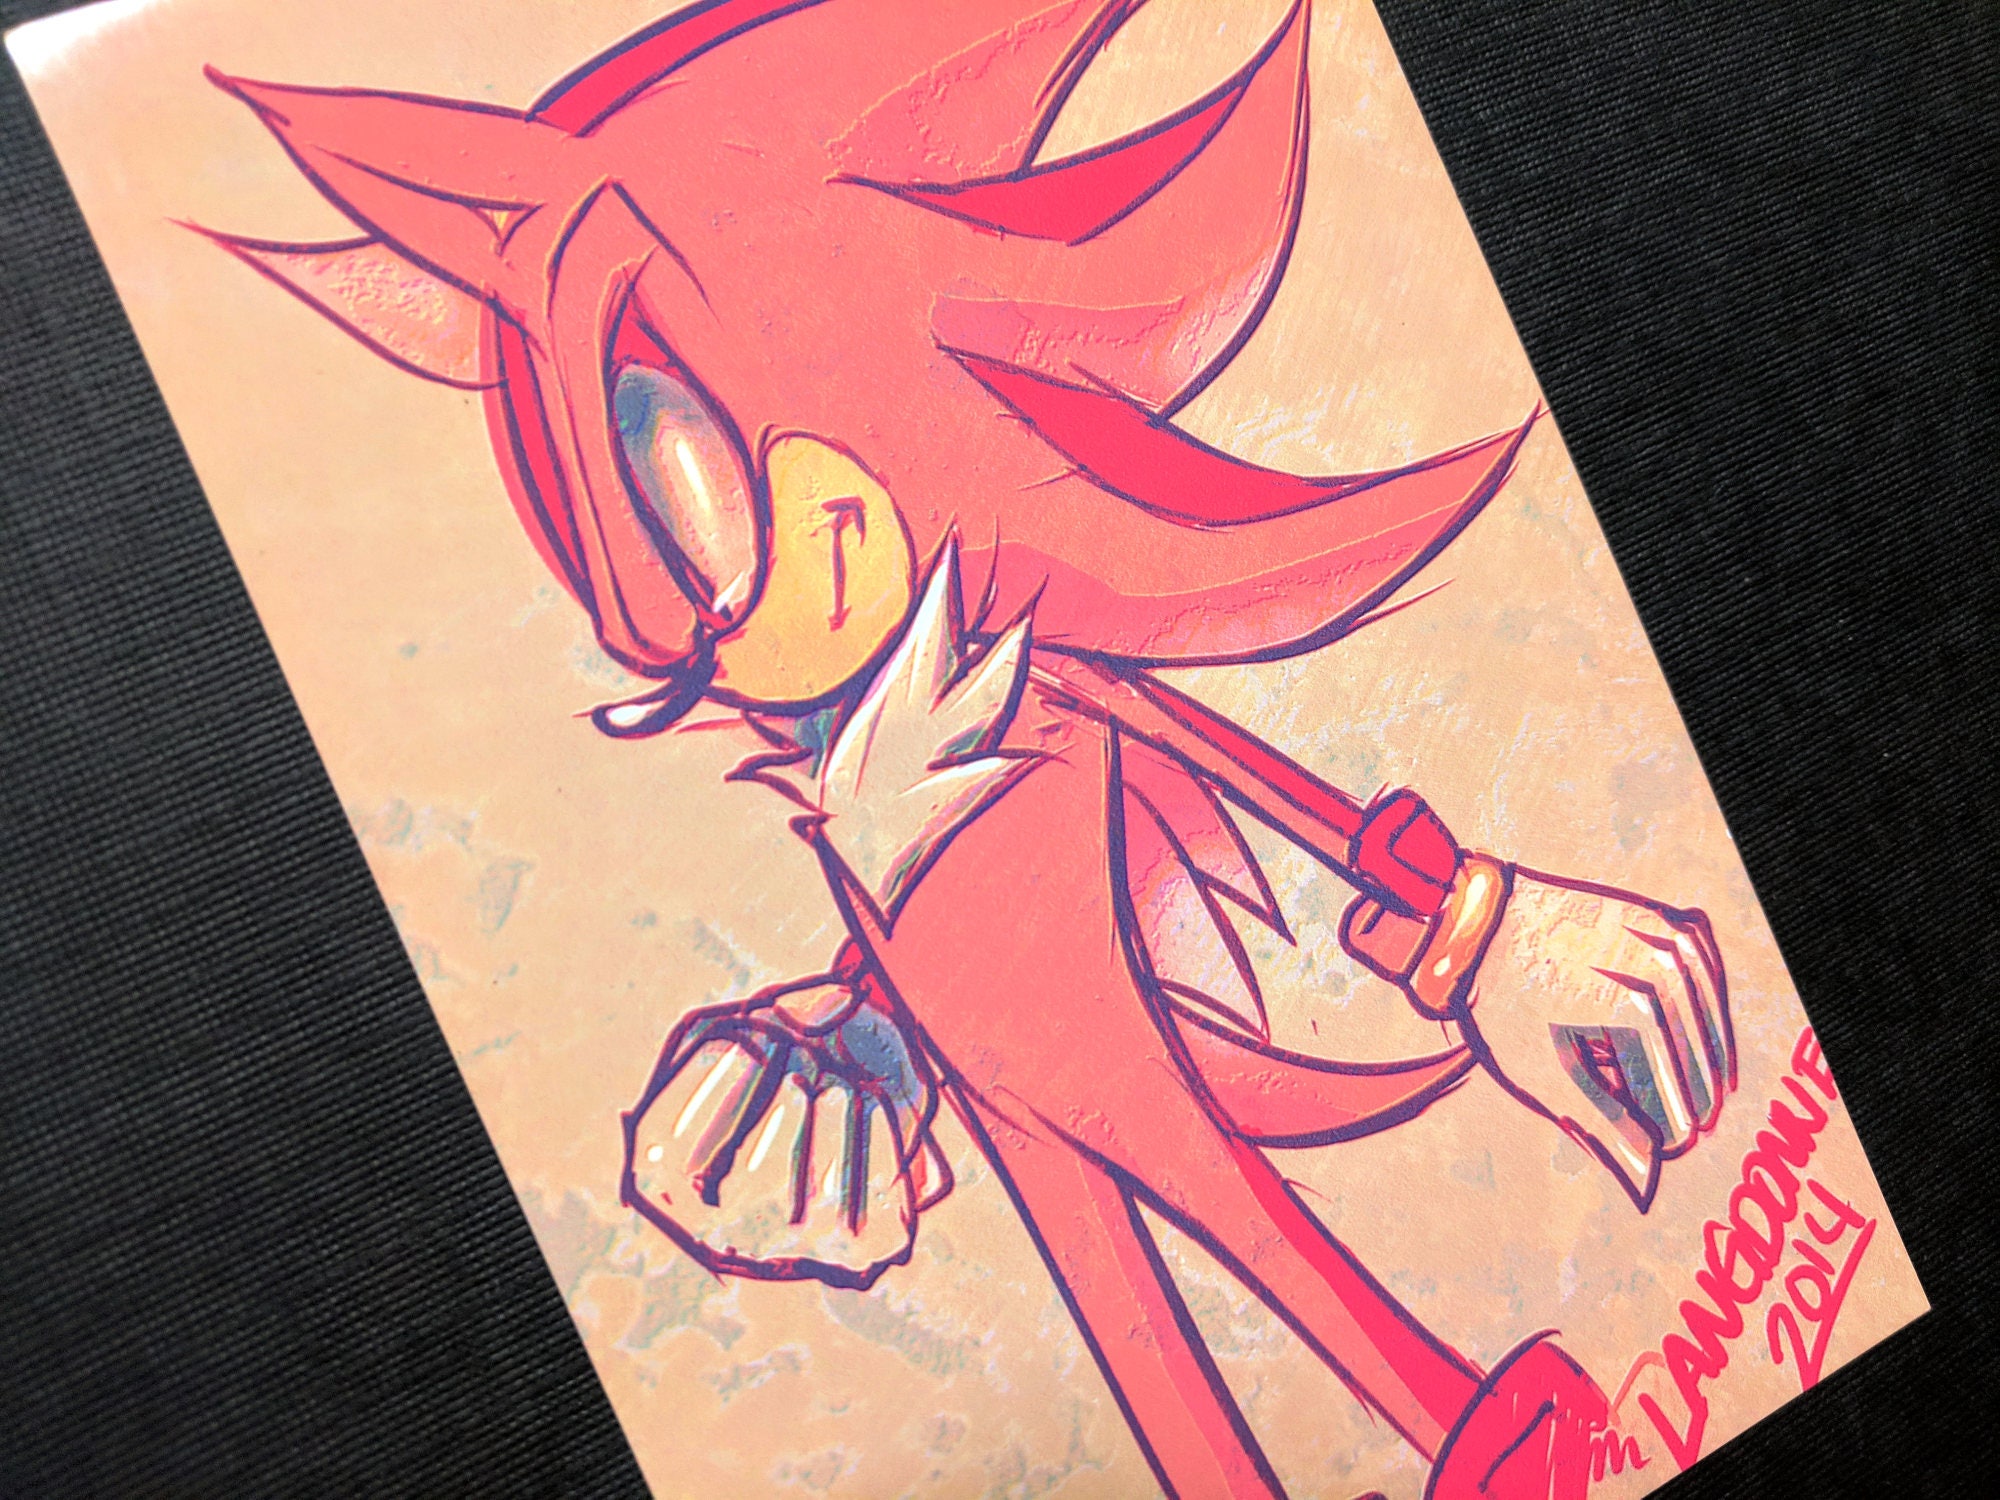 Shadow The Hedgehog Art Print for Sale by AndreanaWen